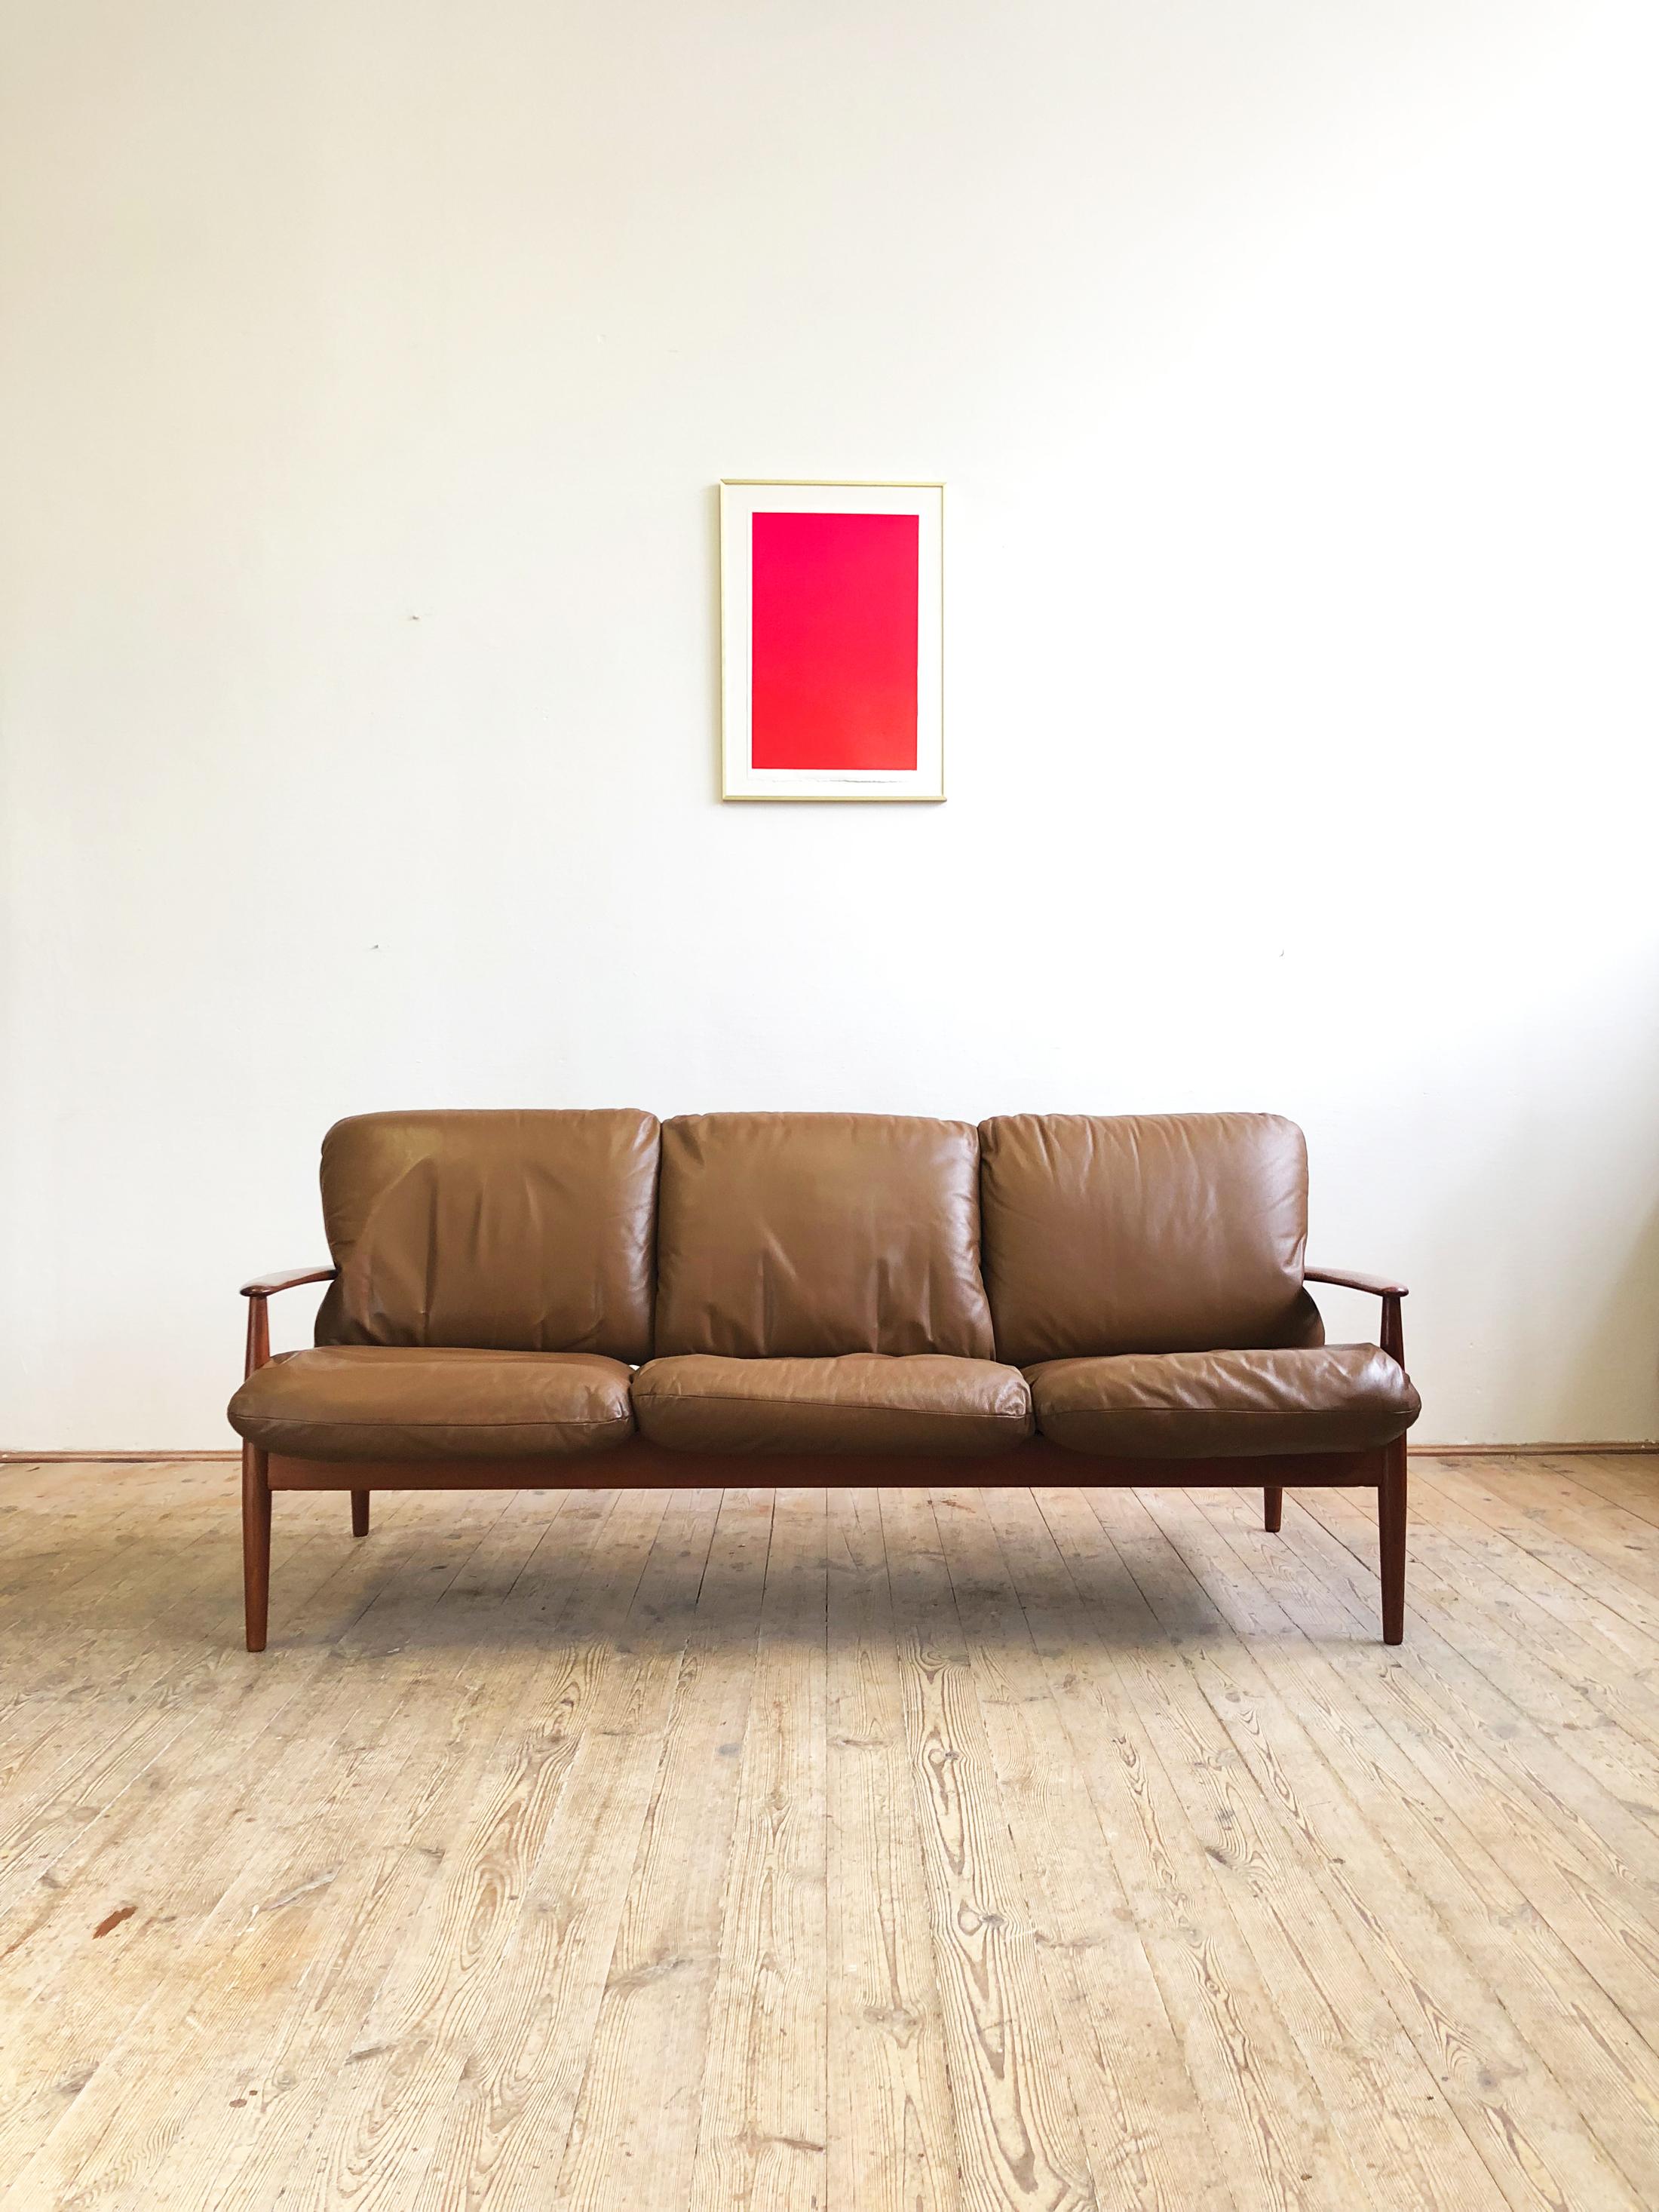 Teak sofa designed by Grete Jalk and produced by Cado. The sofa shows best Danish quality craftsmanship. It comes with soft and very comfortable cushions with a newer soft leather upholstery.